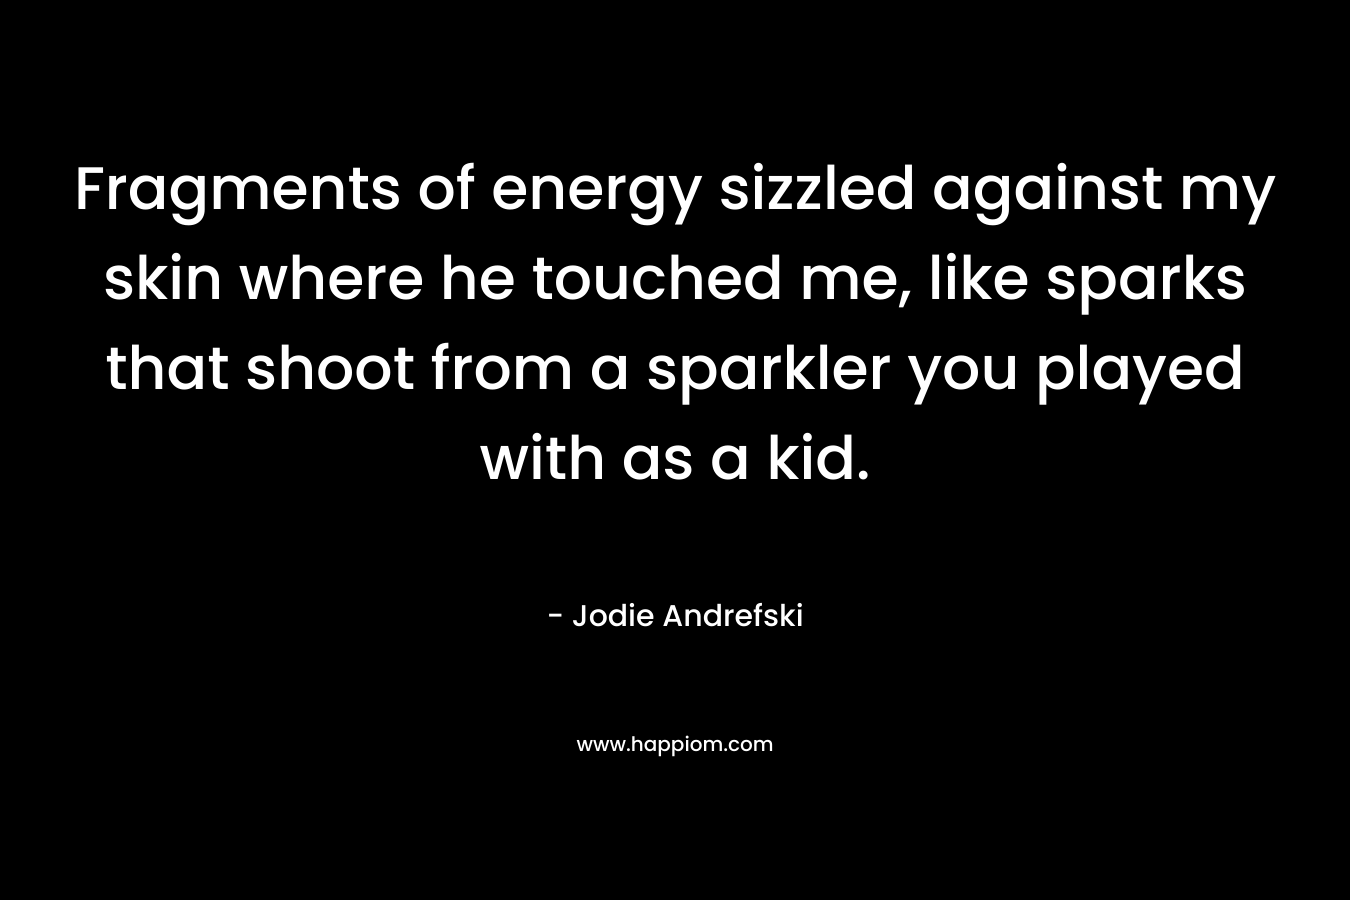 Fragments of energy sizzled against my skin where he touched me, like sparks that shoot from a sparkler you played with as a kid. – Jodie Andrefski